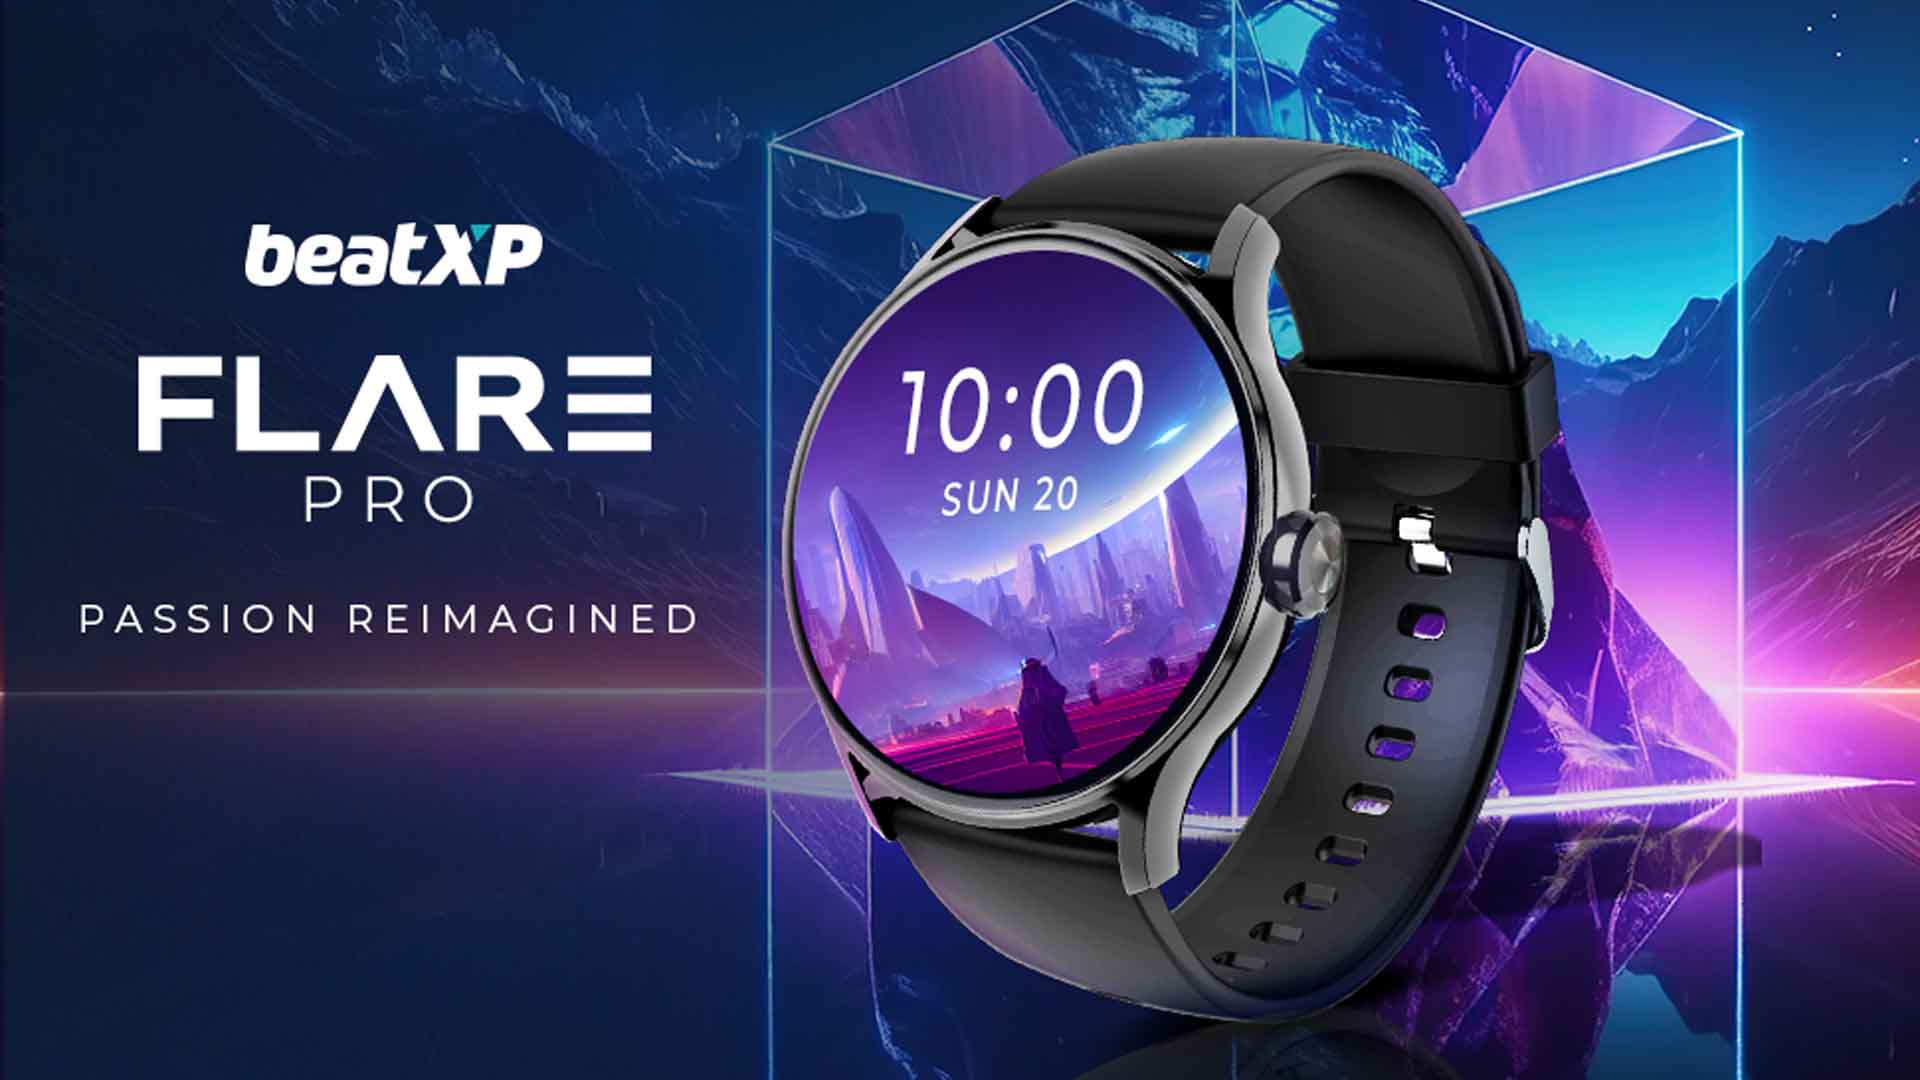 The beatXP Flare Pro is a smartwatch with a 1.39 inch touch display and a circle-shaped dial. It has a resolution of 240 x 240 pixels and a multi-touch panel with a pixel density of 244 ppi. The smartwatch has a battery backup of up to 7 days and is water resistant with an IP68 rating. 
